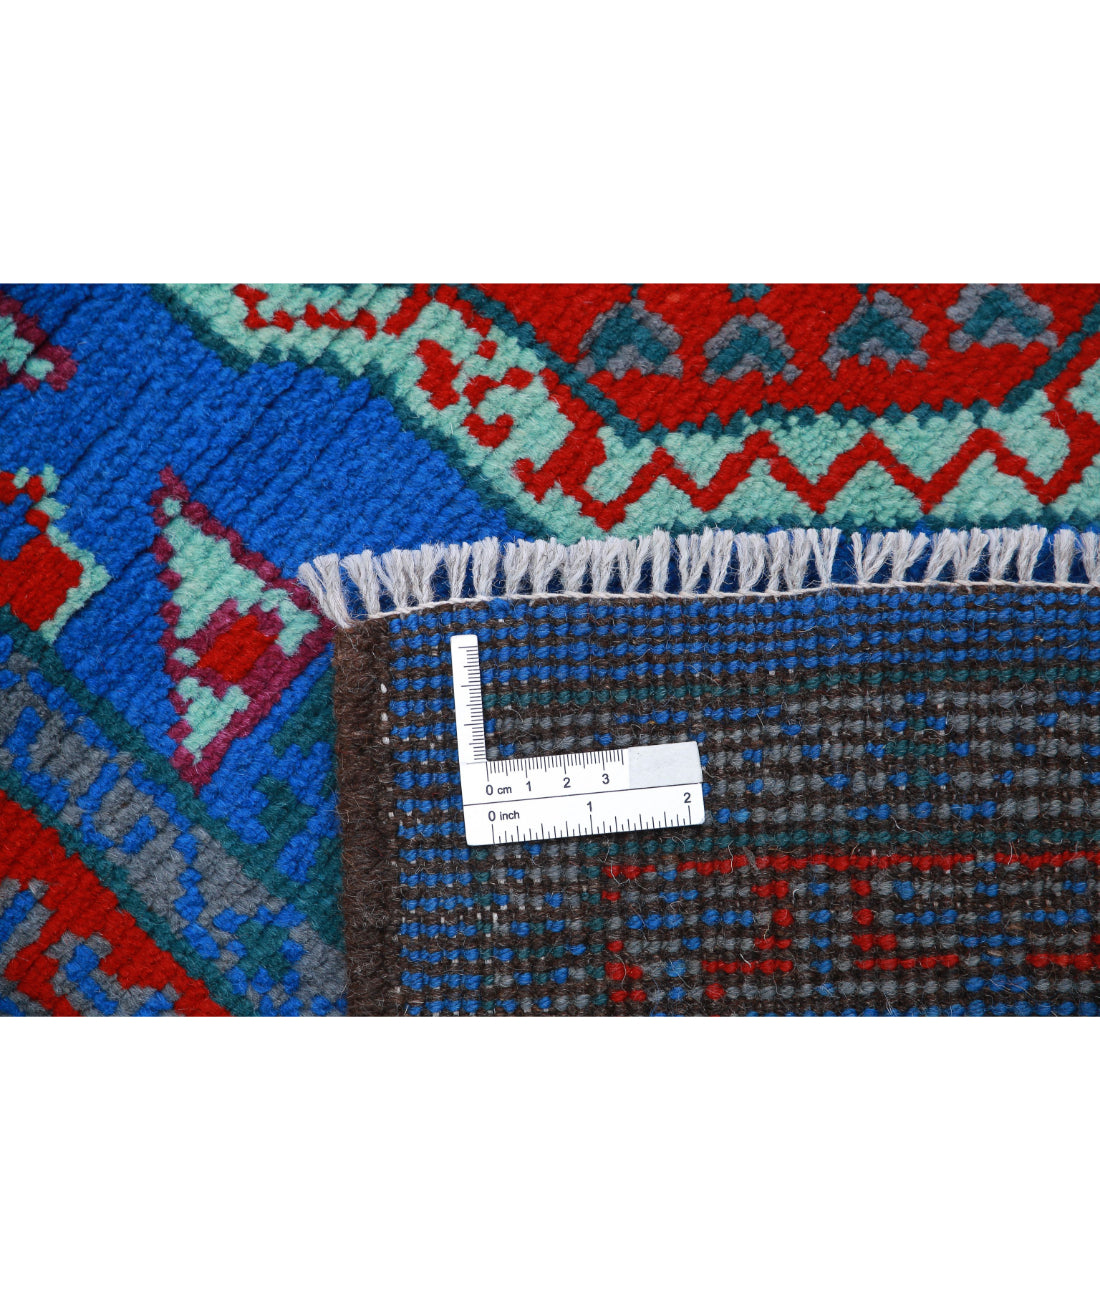 Revival 3'6'' X 4'10'' Hand-Knotted Wool Rug 3'6'' x 4'10'' (105 X 145) / Blue / Red